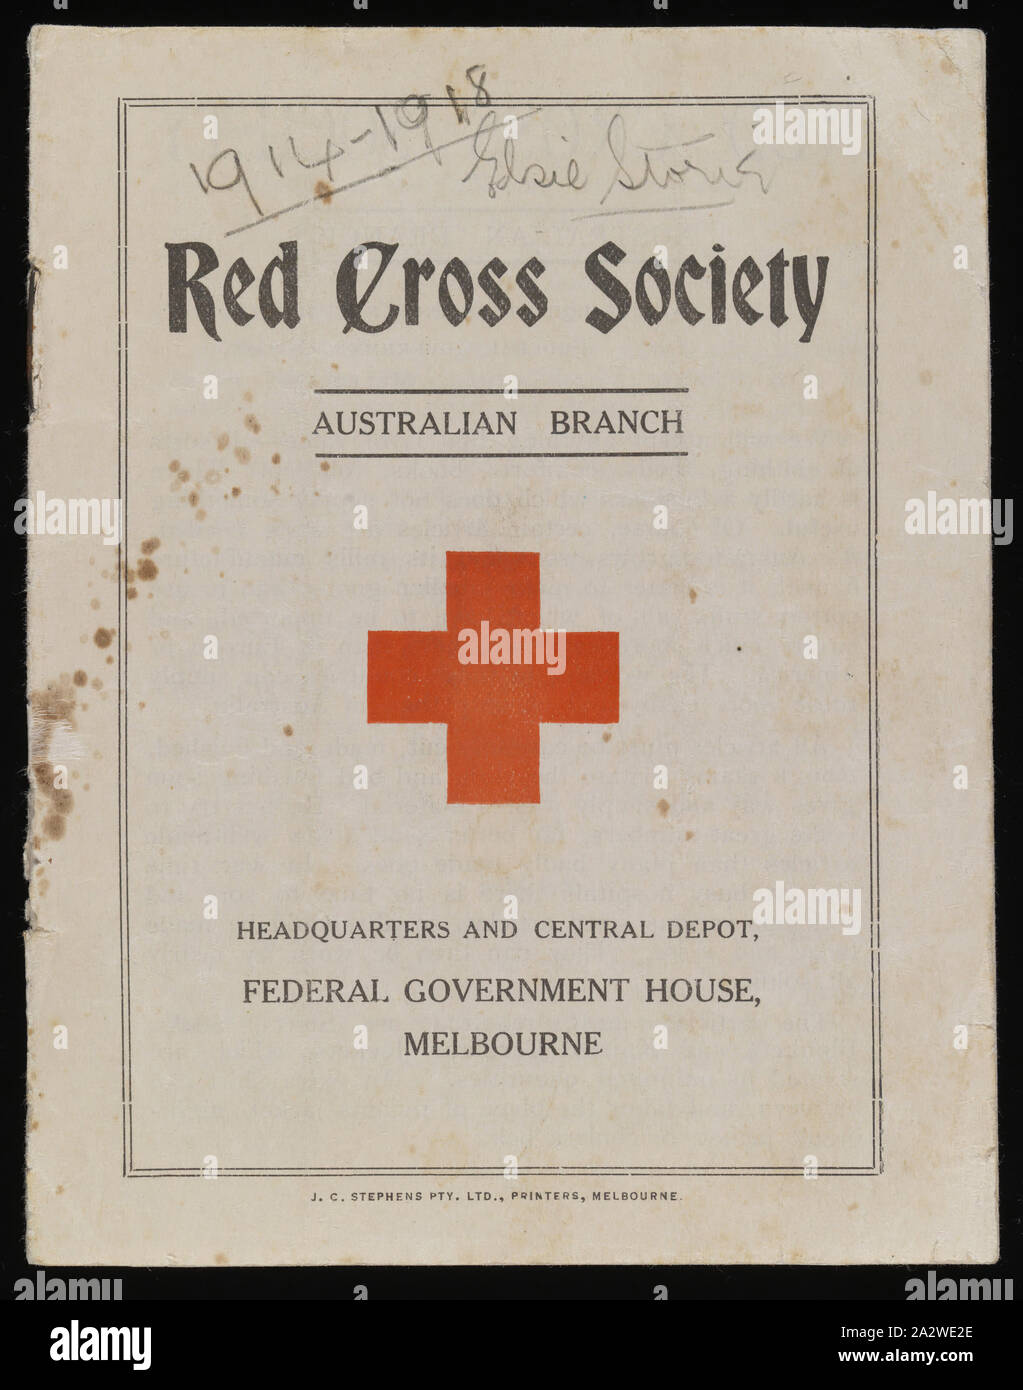 Booklet - Red Cross Society, Goods Needed for War Effort, Australian Branch, World War I, circa 1914, Paper booklet with information about goods which were needed by the Red Cross during World War I for onward transmission to servicemen and to Army hospitals. The booklet was printed by J.C. Stephens Pty Ltd, Melbourne, around 1914. The booklet belonged to Miss Elsie Storie of Brunswick, later of Canterbury, a young woman during the War. During the World War I, Australians made thousands of socks Stock Photo